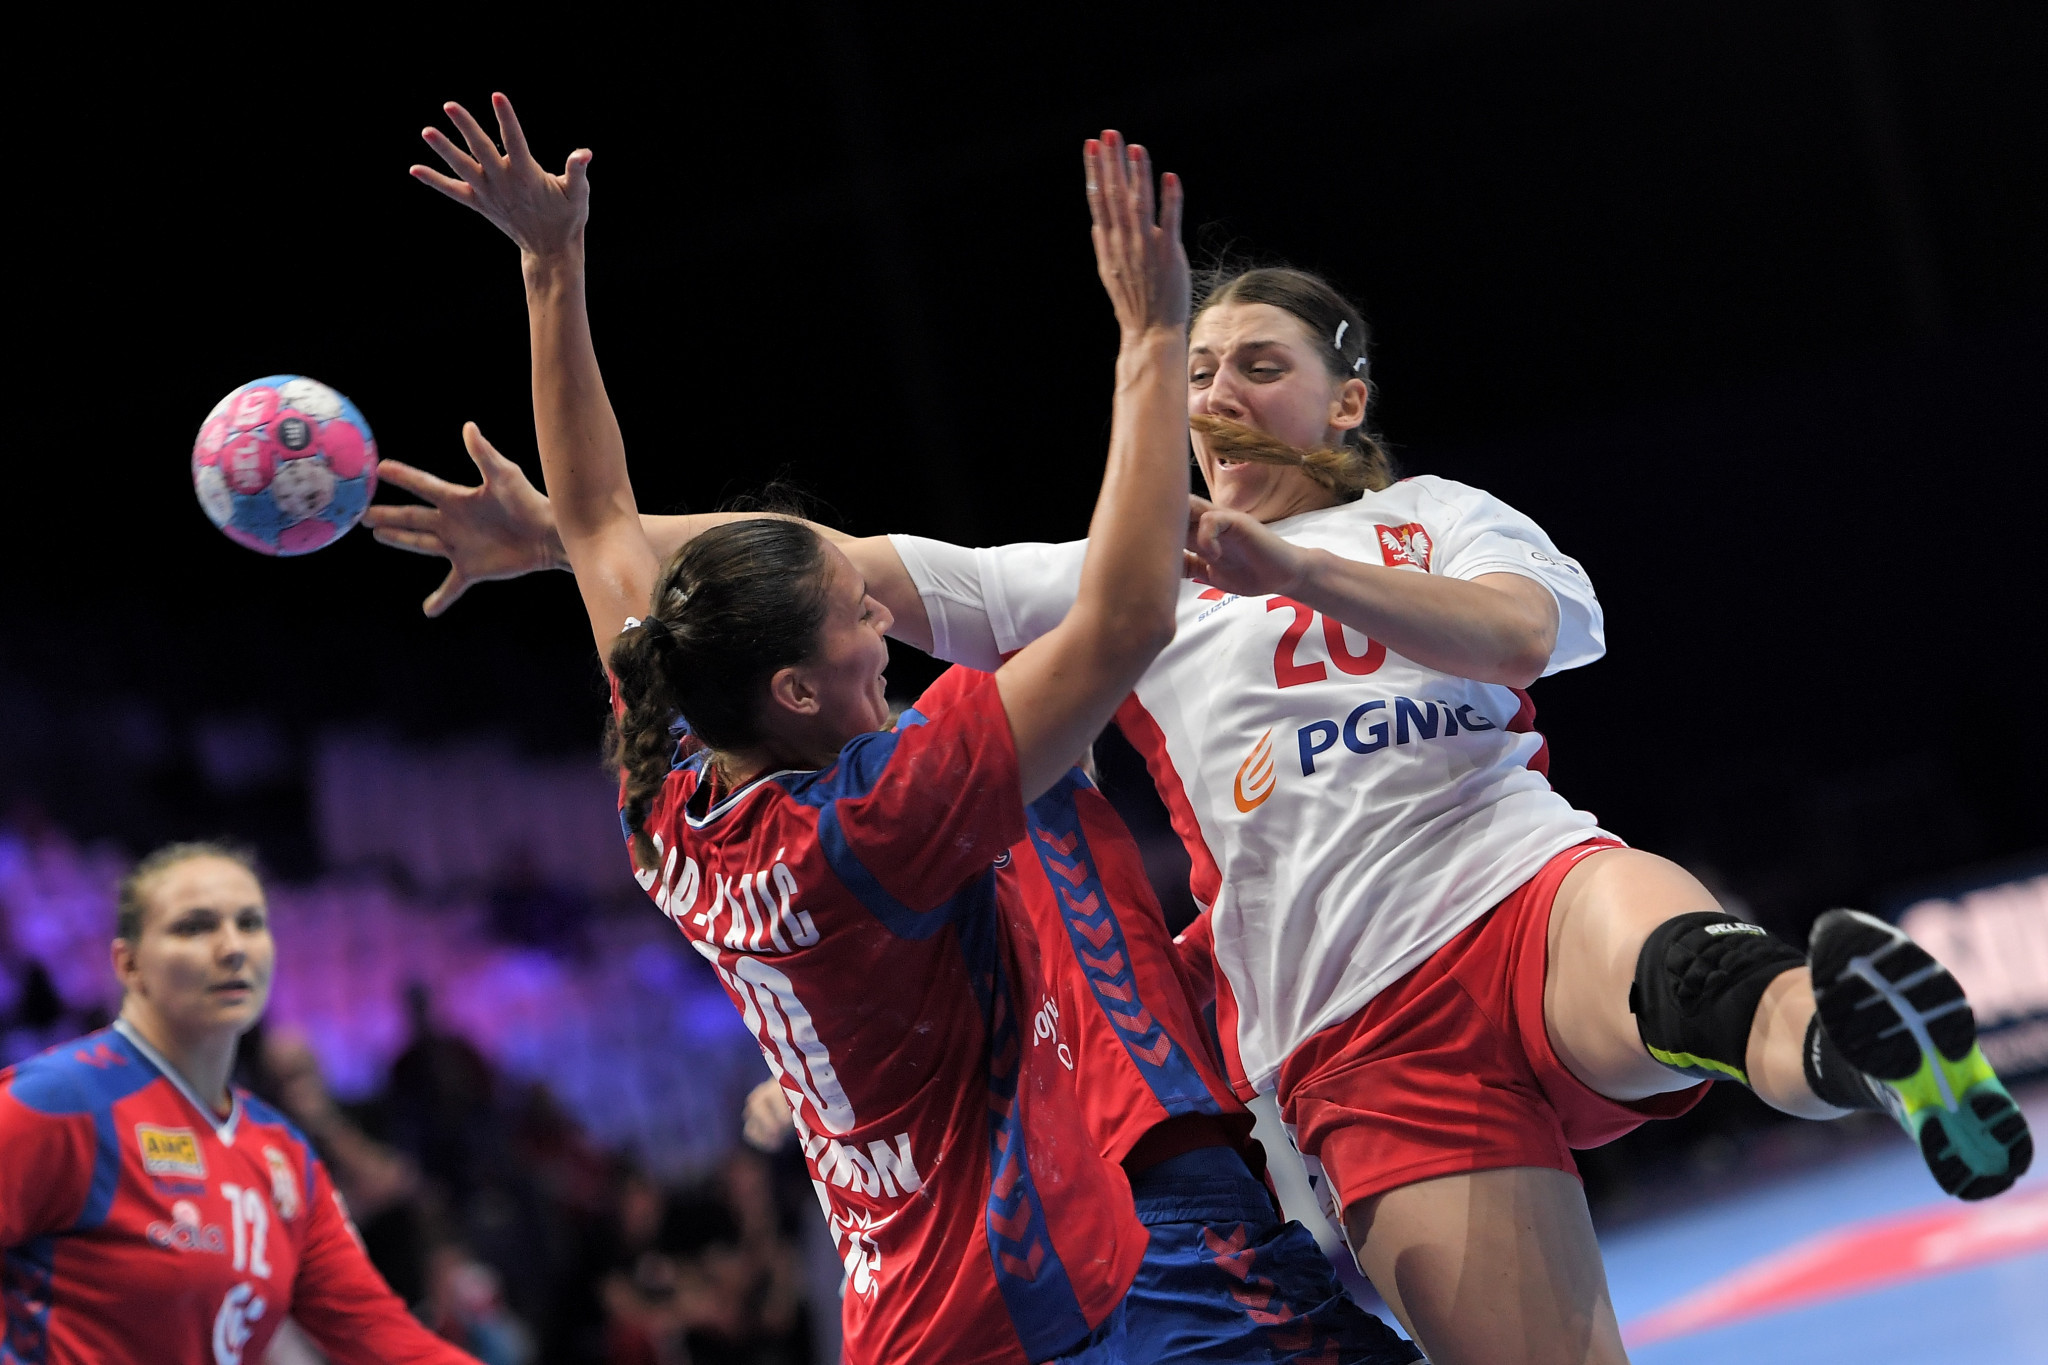 Serbia beat Poland 33-26 in their Group A game at the European Women's Handball Championships in Nantes ©Getty Images